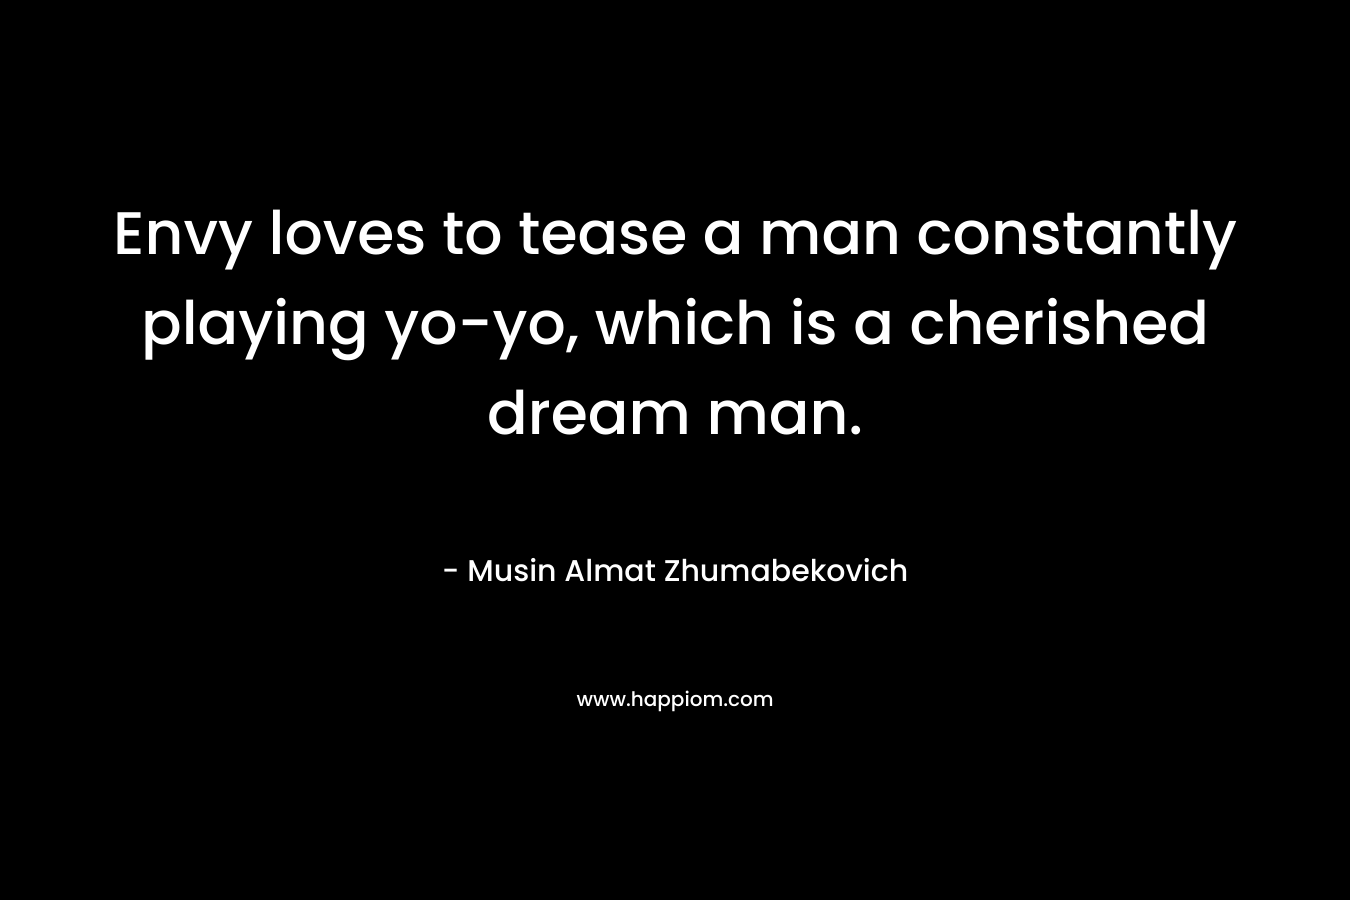 Envy loves to tease a man constantly playing yo-yo, which is a cherished dream man. – Musin Almat Zhumabekovich